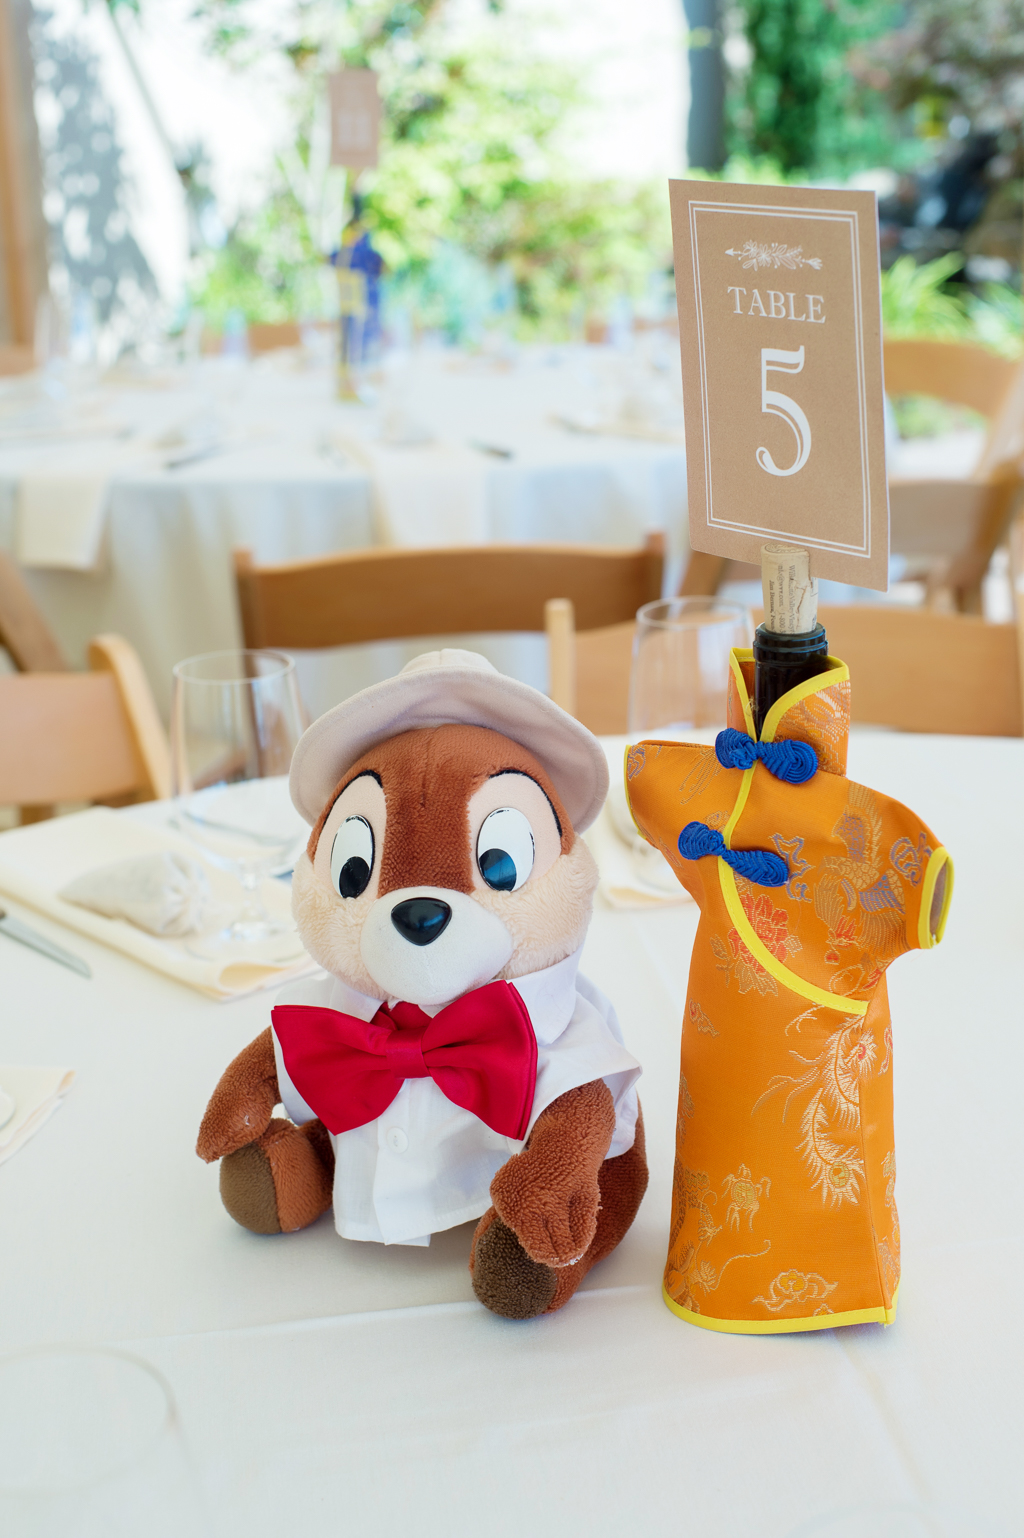 chip and dale rescue ranger stuffed animal sits on table center as wedding reception decor